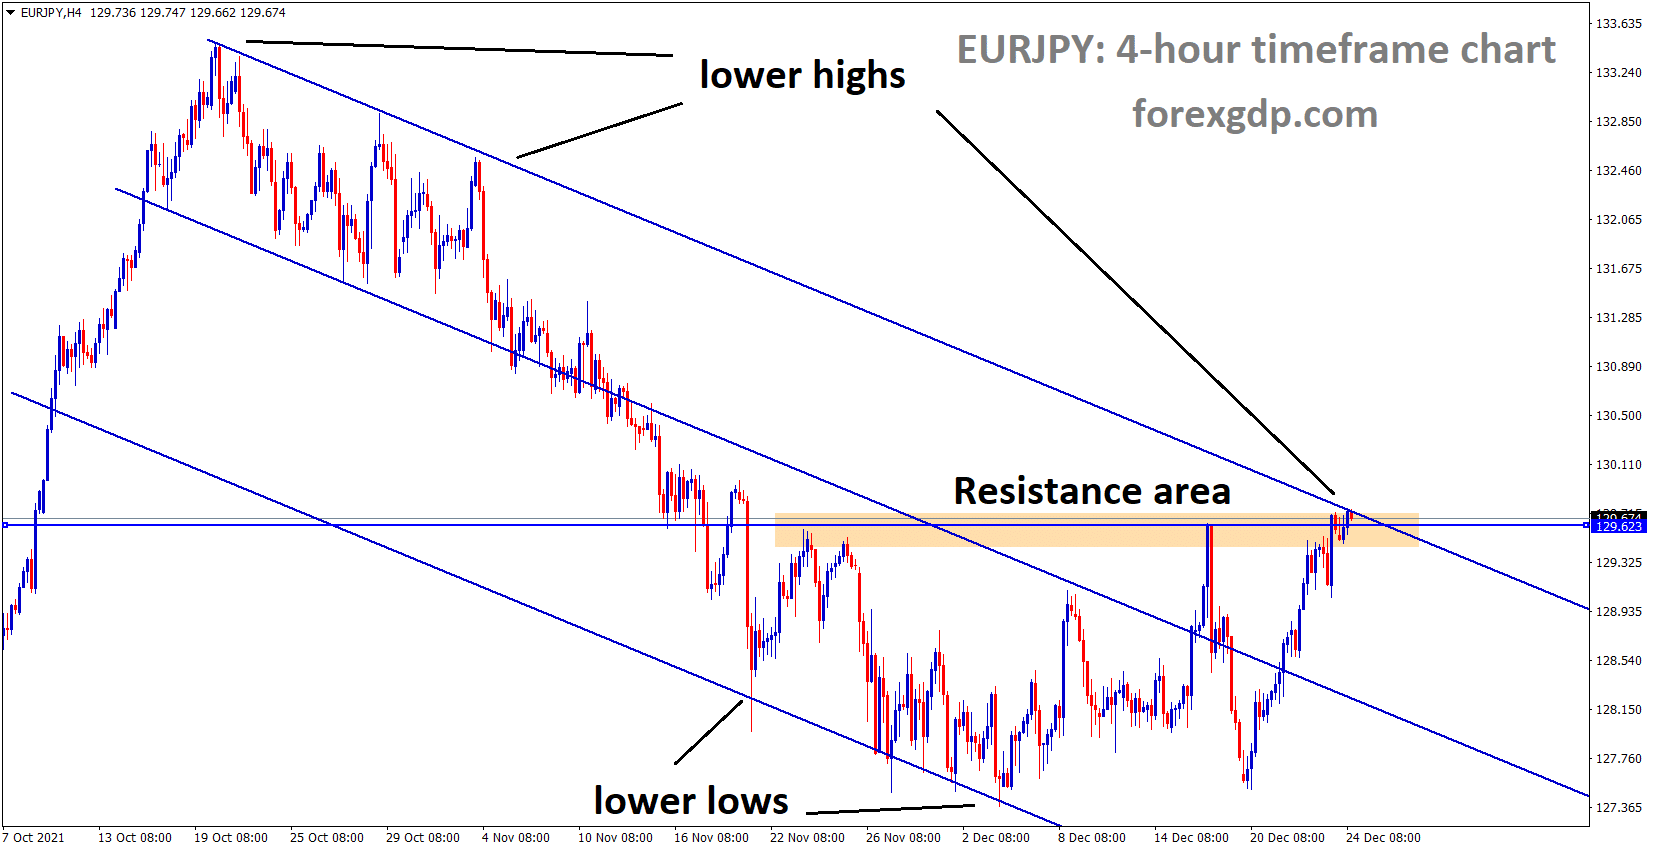 EURJPY is moving in the Descending channel and the market has reached the Horizontal resistance area of the channel